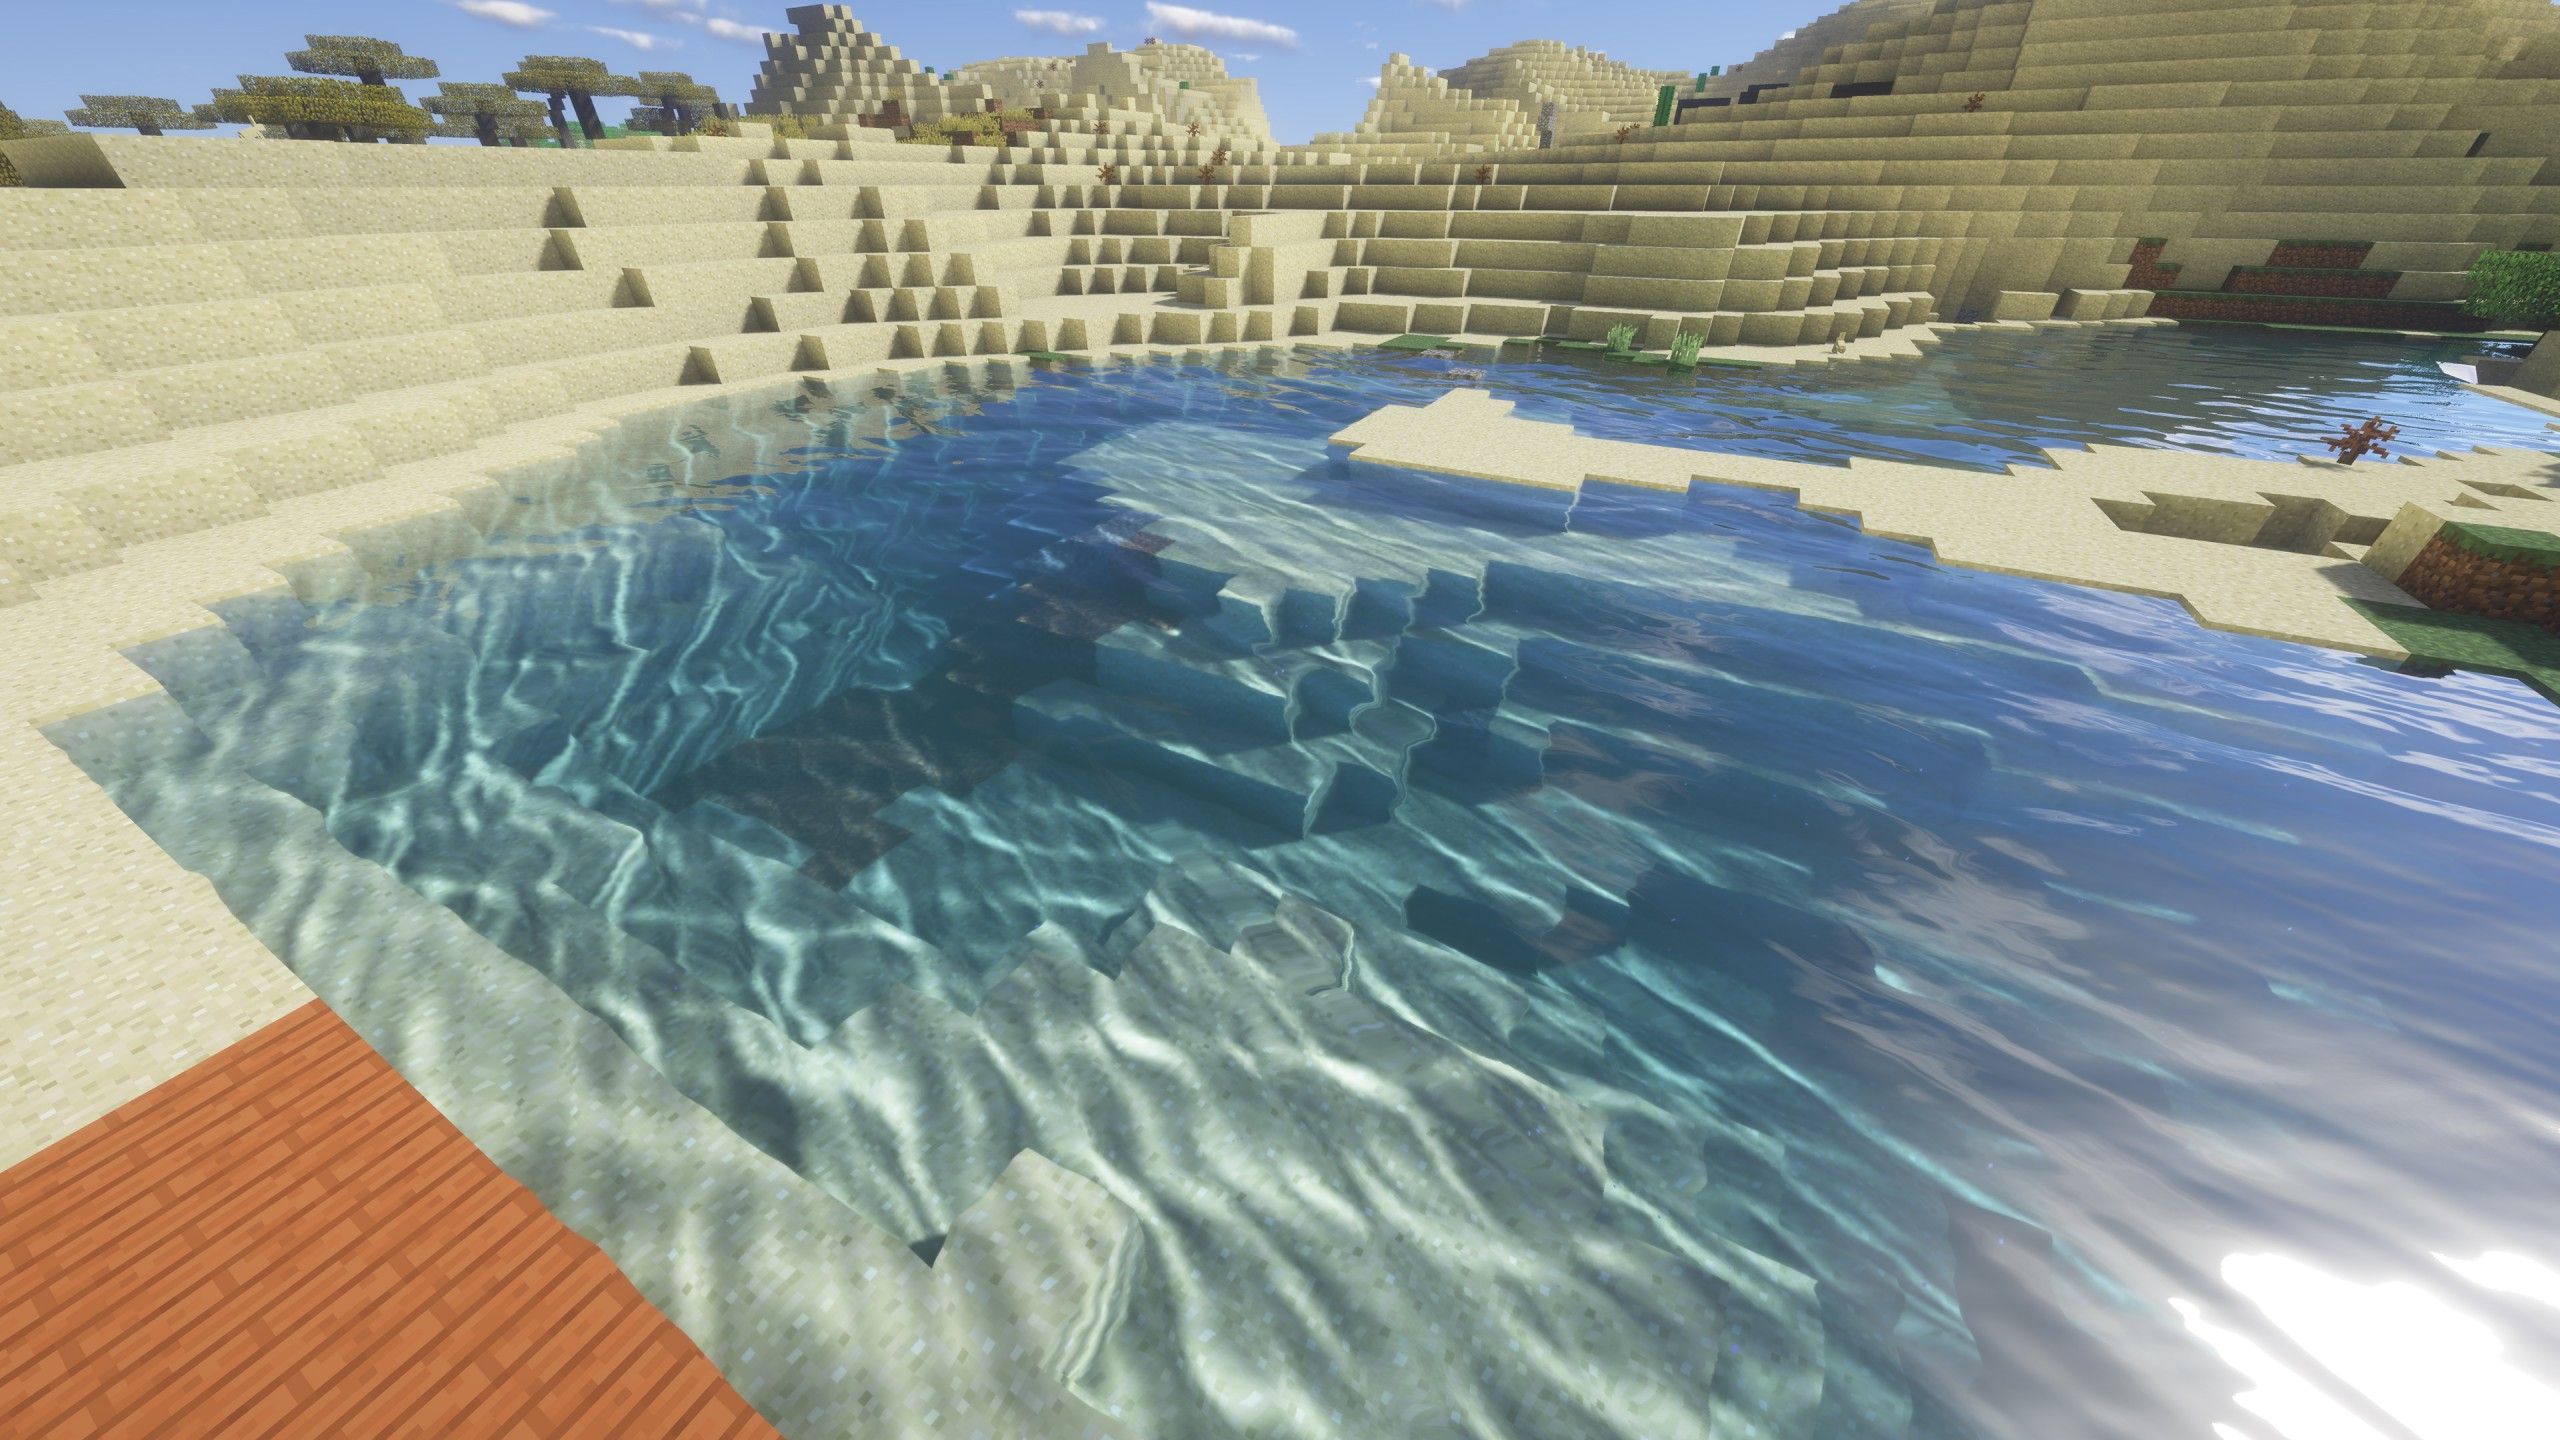 A desert oasis with a small pool of water and a sandy hill in the background - Minecraft